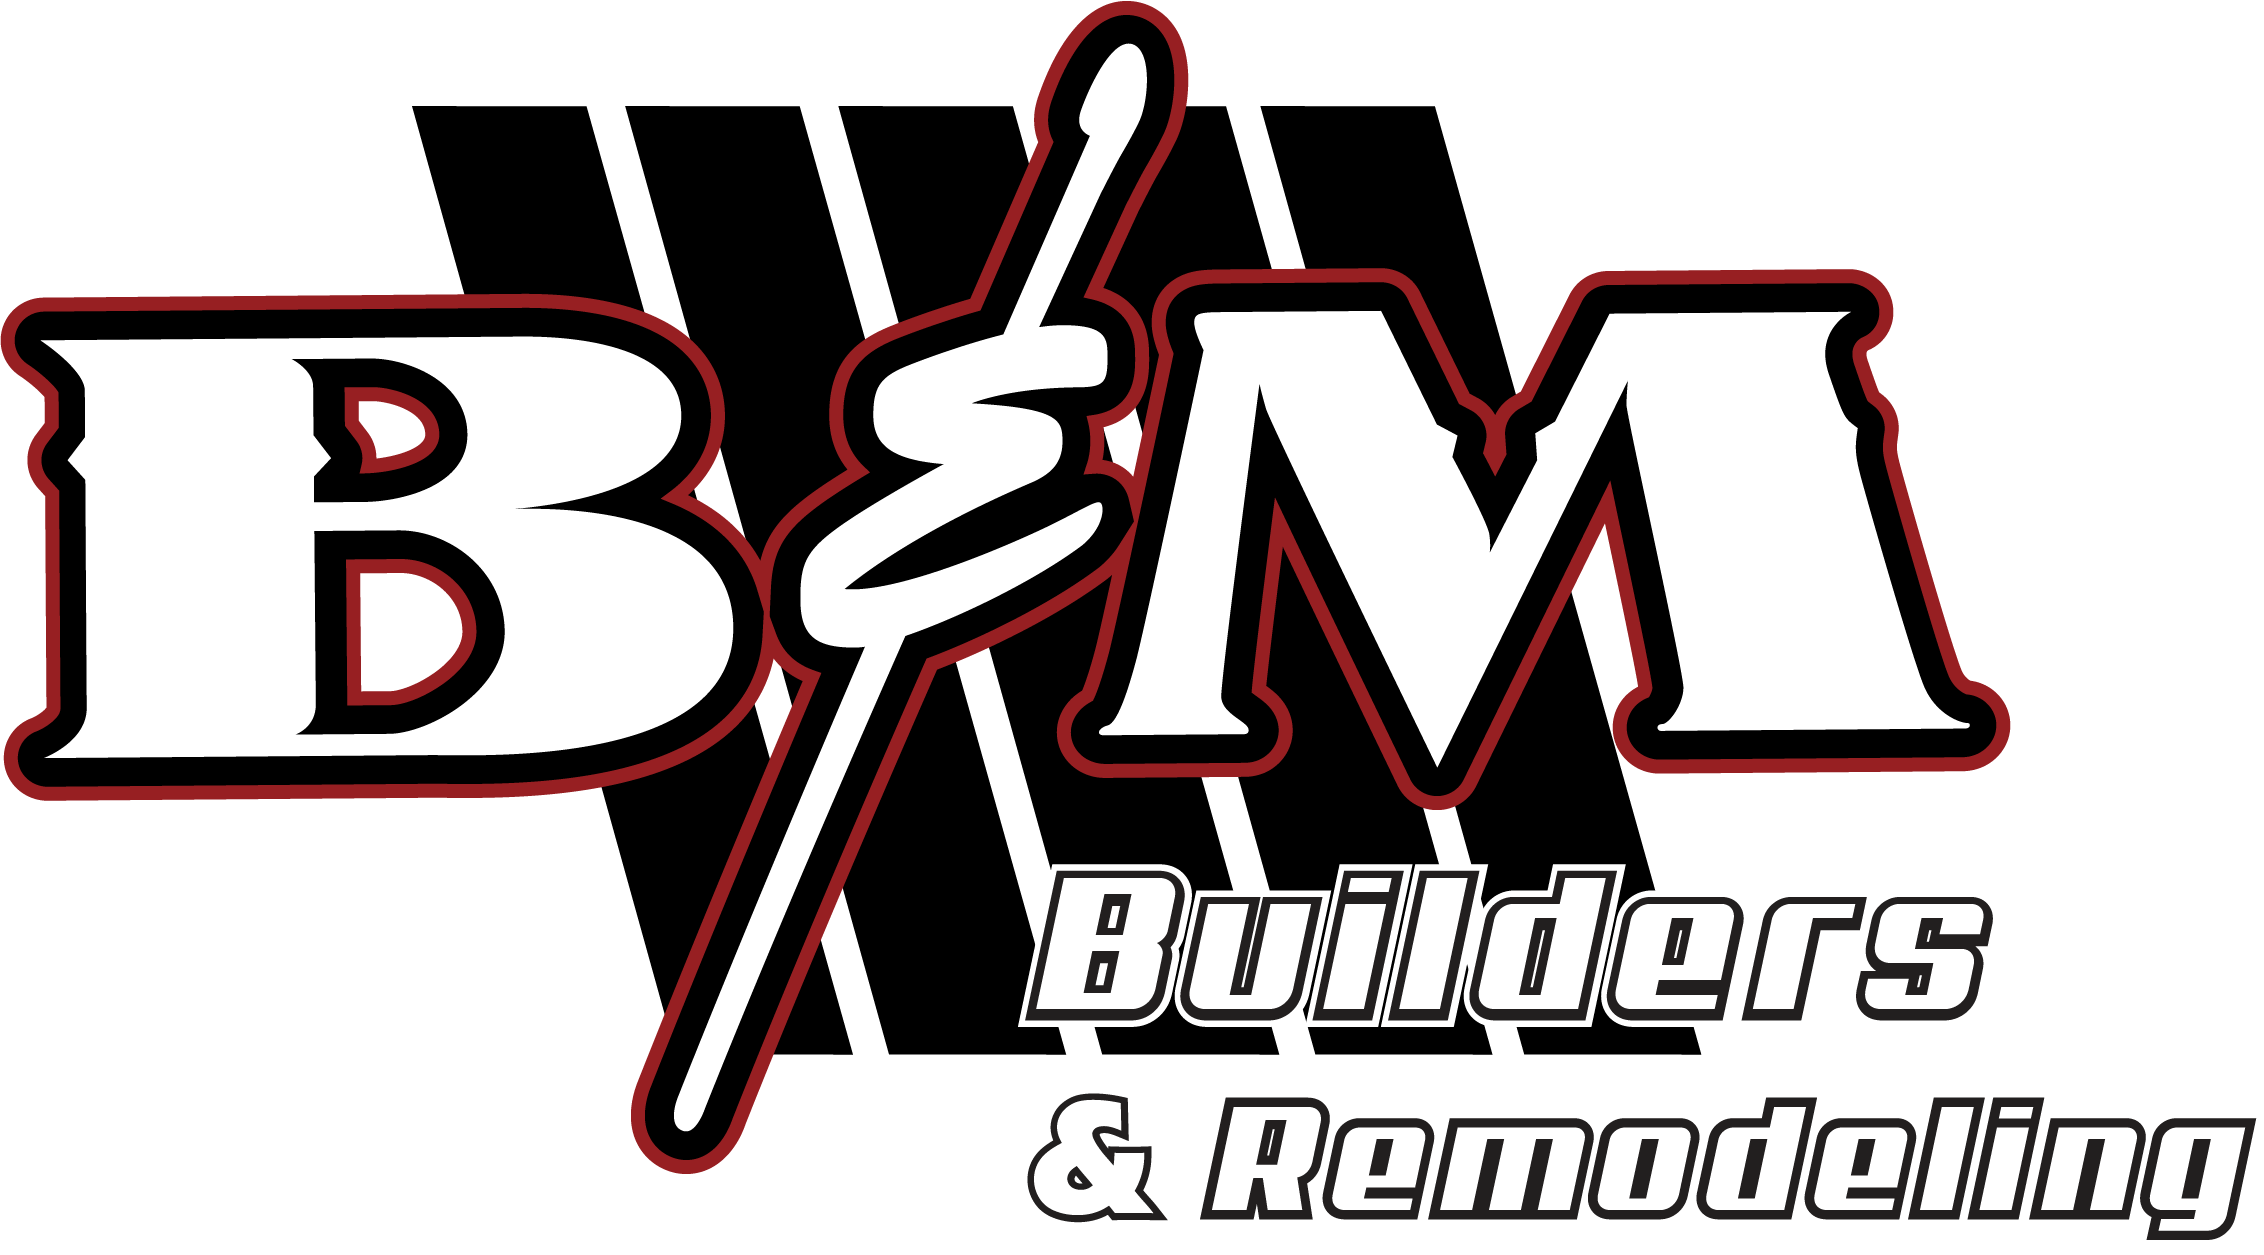 A black and white logo for b & m builders and remodeling.